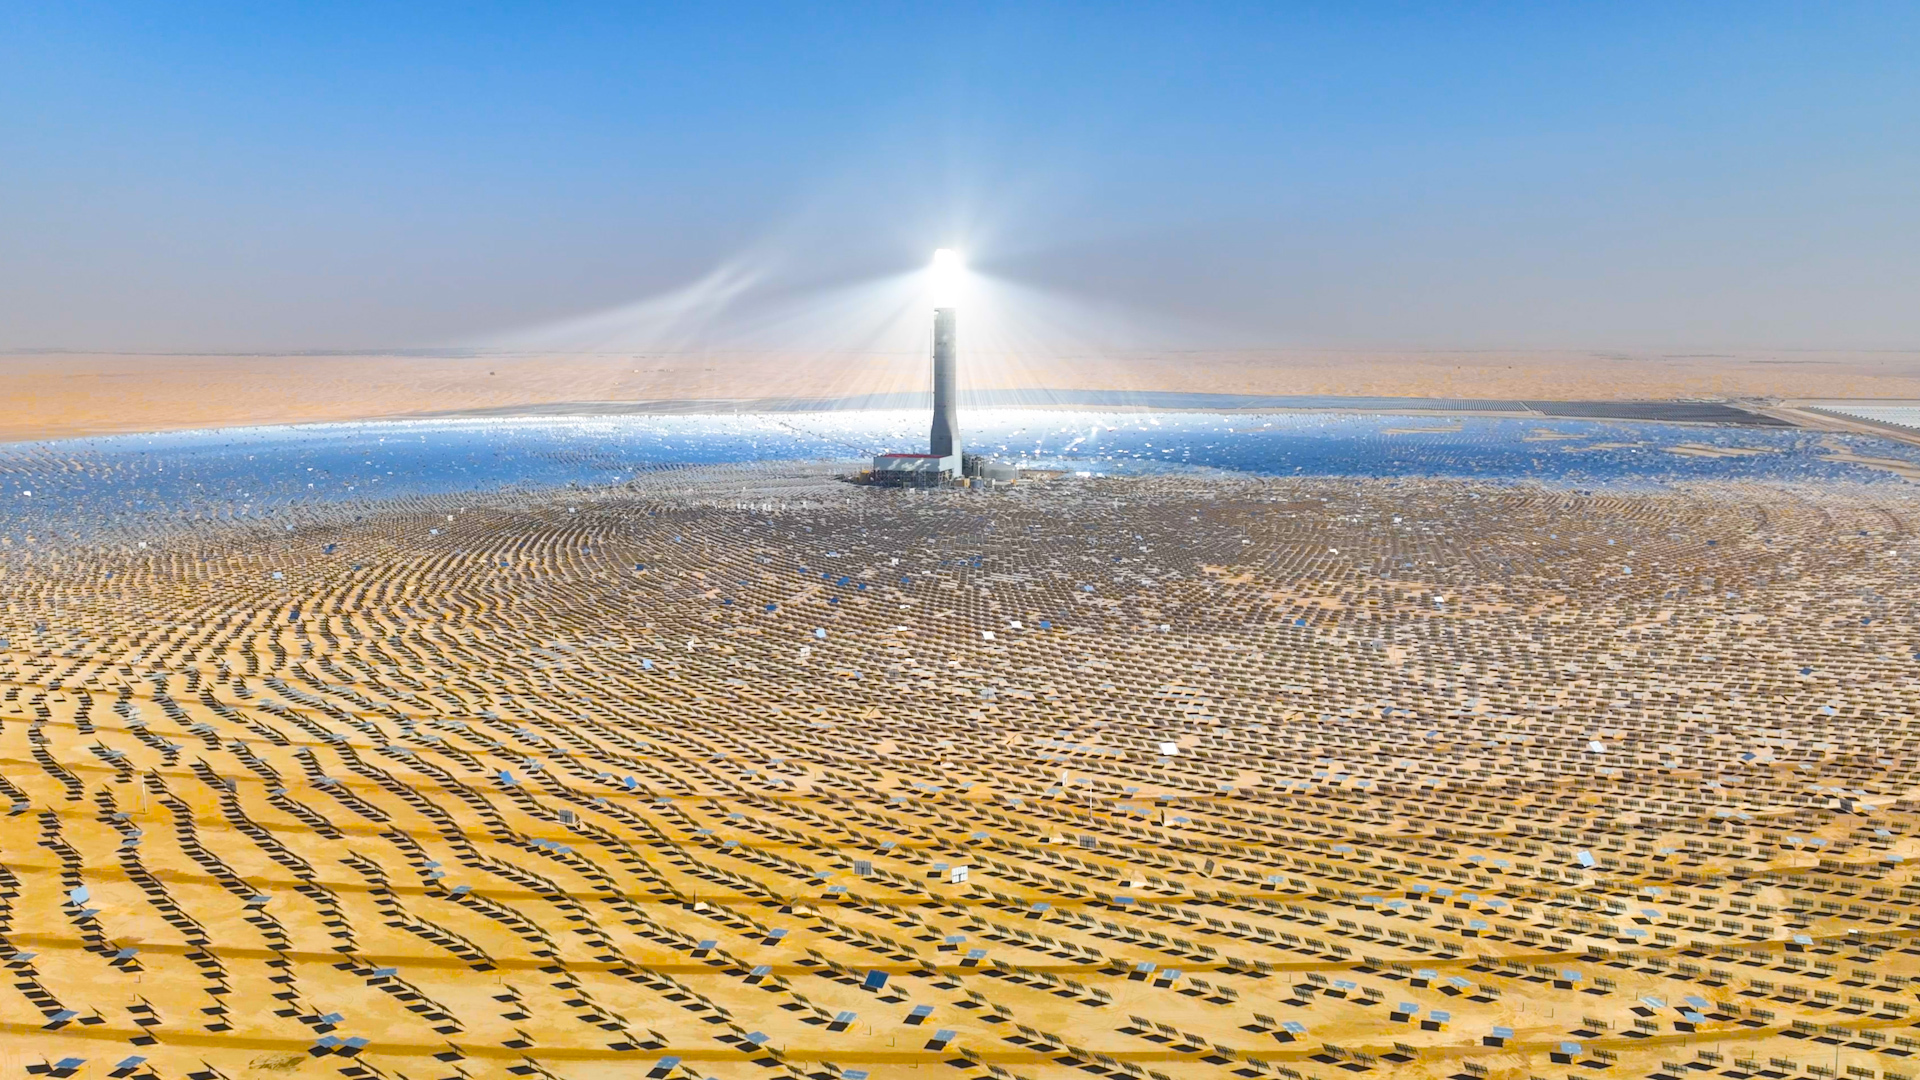 Image for 950MW 4th Phase Of Mohammed Bin Rashid Al Maktoum Solar Park To Provide Clean Energy For 320,000 Residences, Reduce Carbon Emissions By 1.6 mn Tonnes Annually